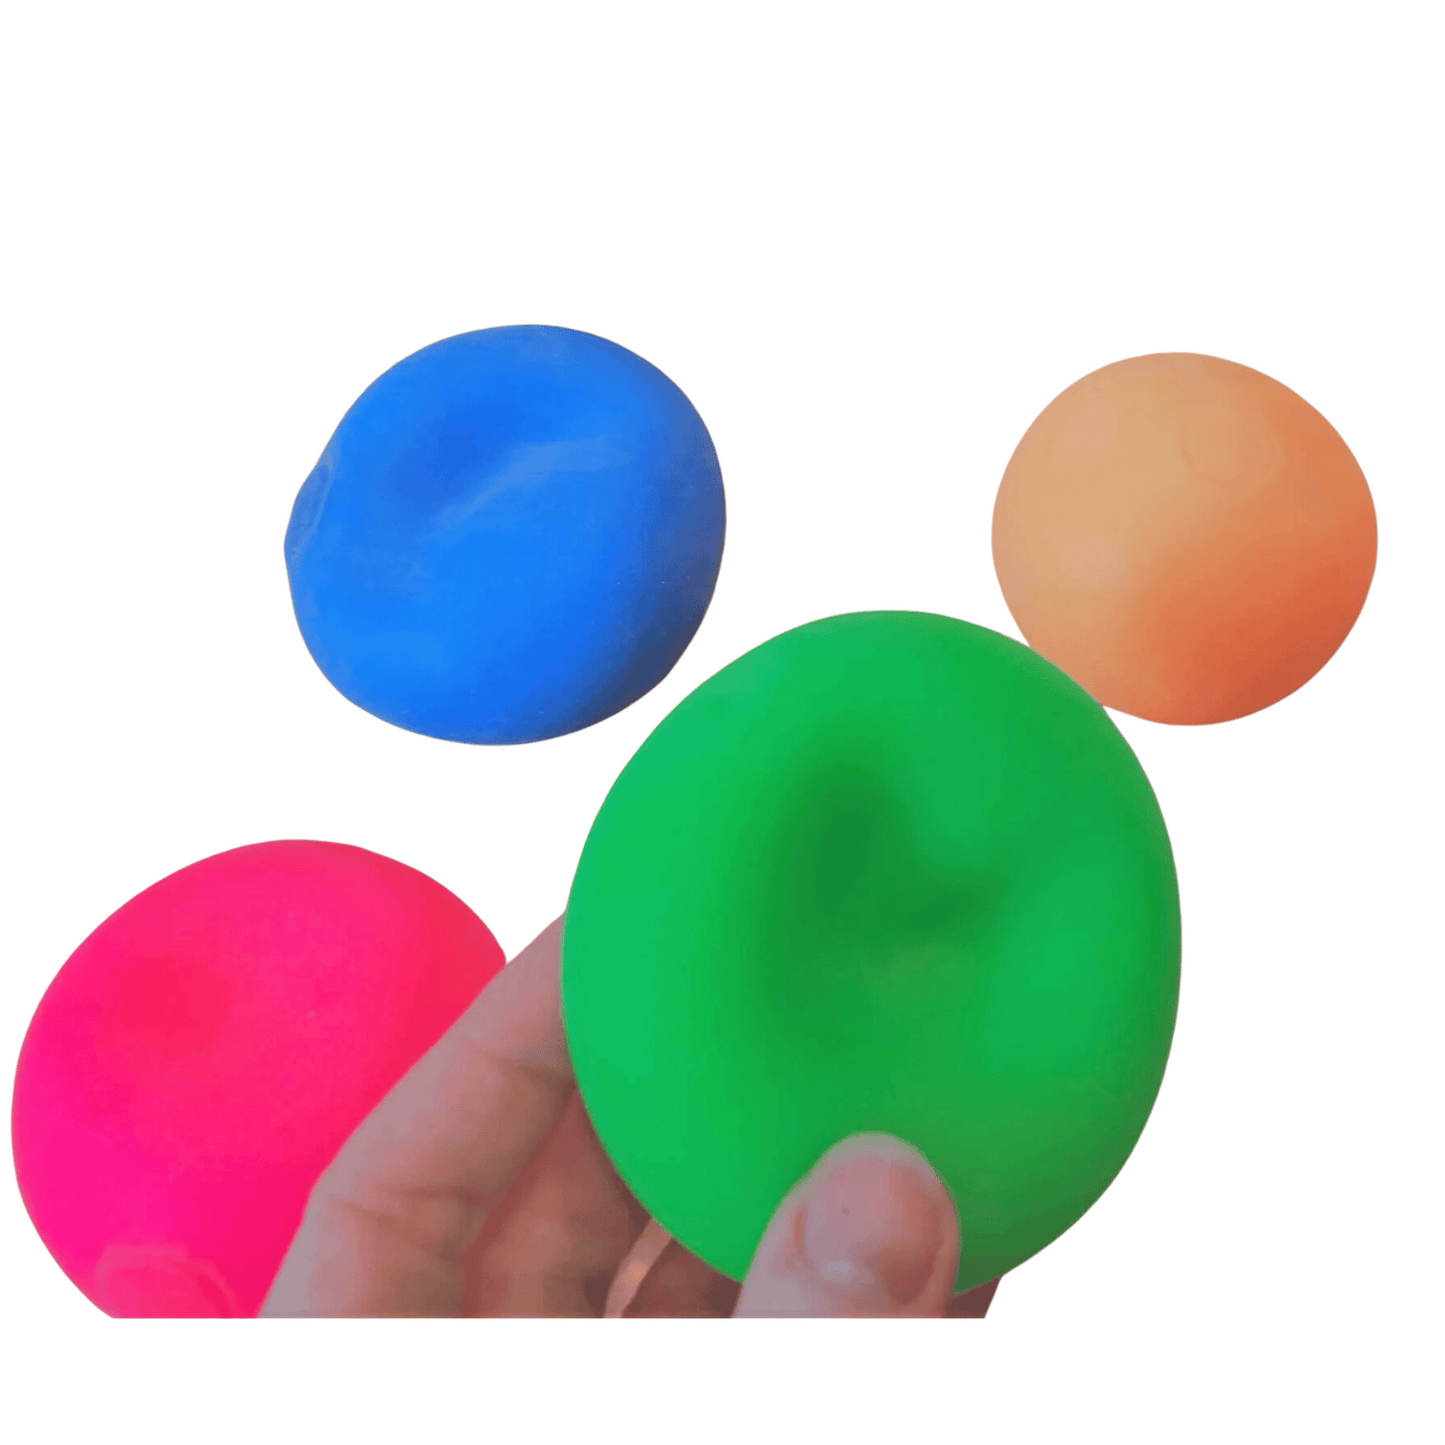 Mouldable clay stress balls